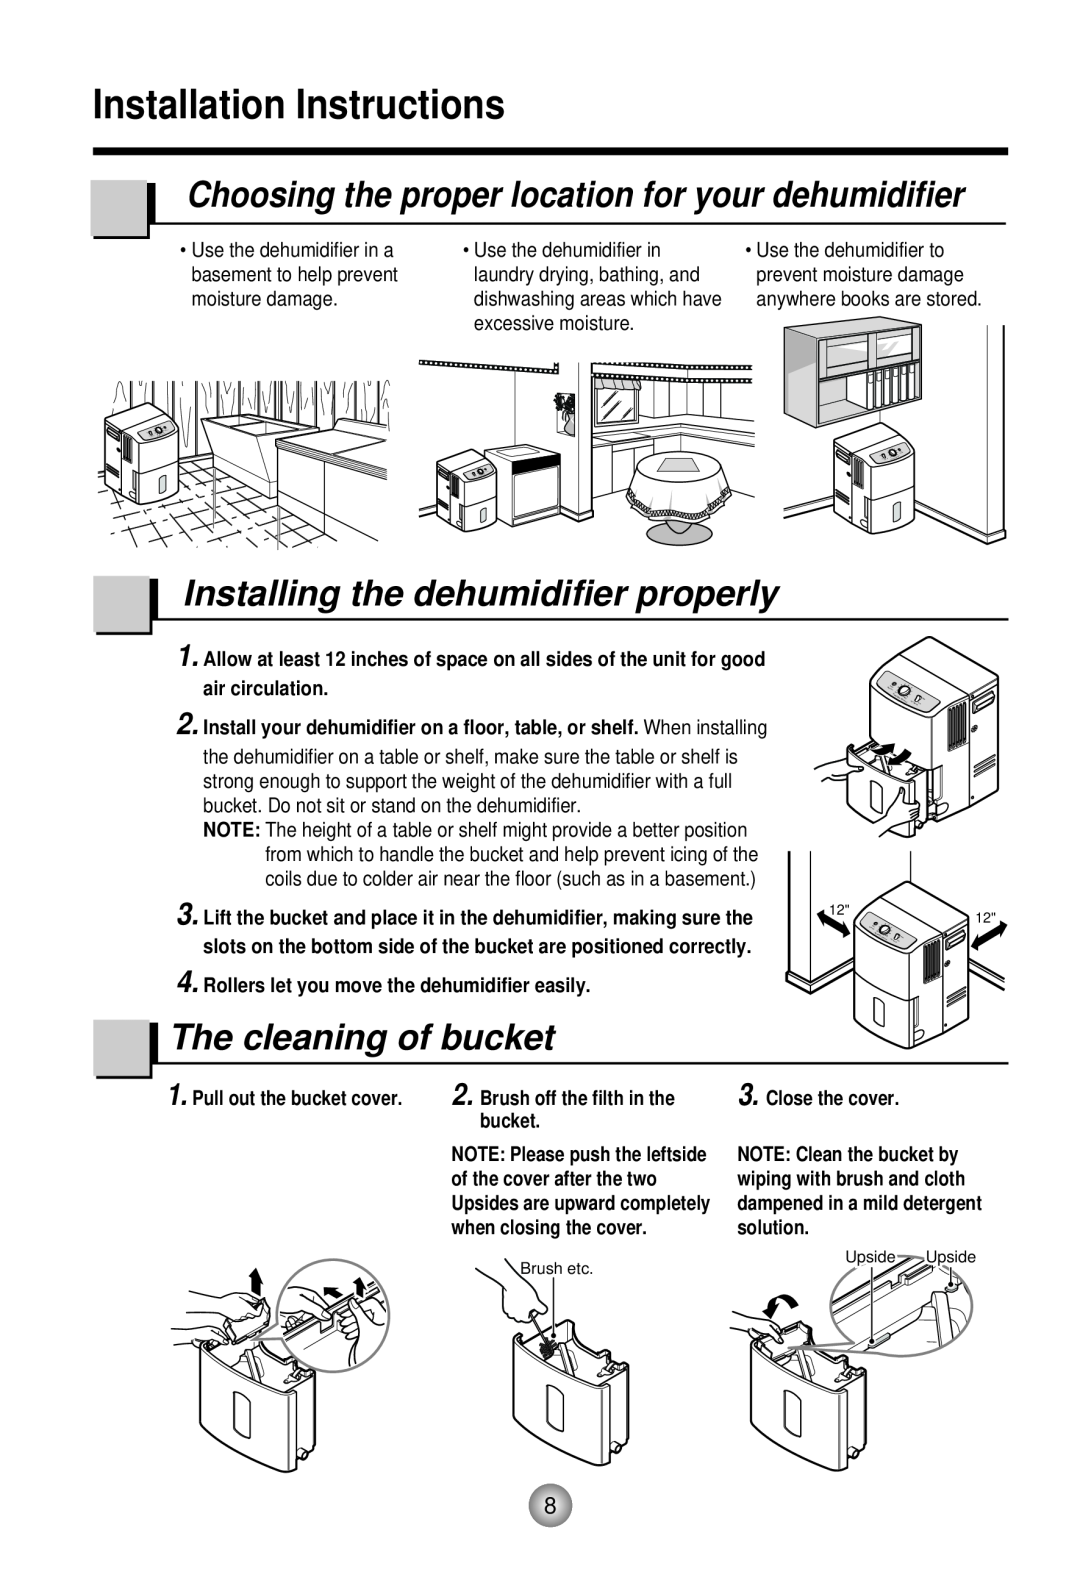 Goldstar DH40, DH50, DH30 Installation Instructions, Installing the dehumidifier properly, The cleaning of bucket 